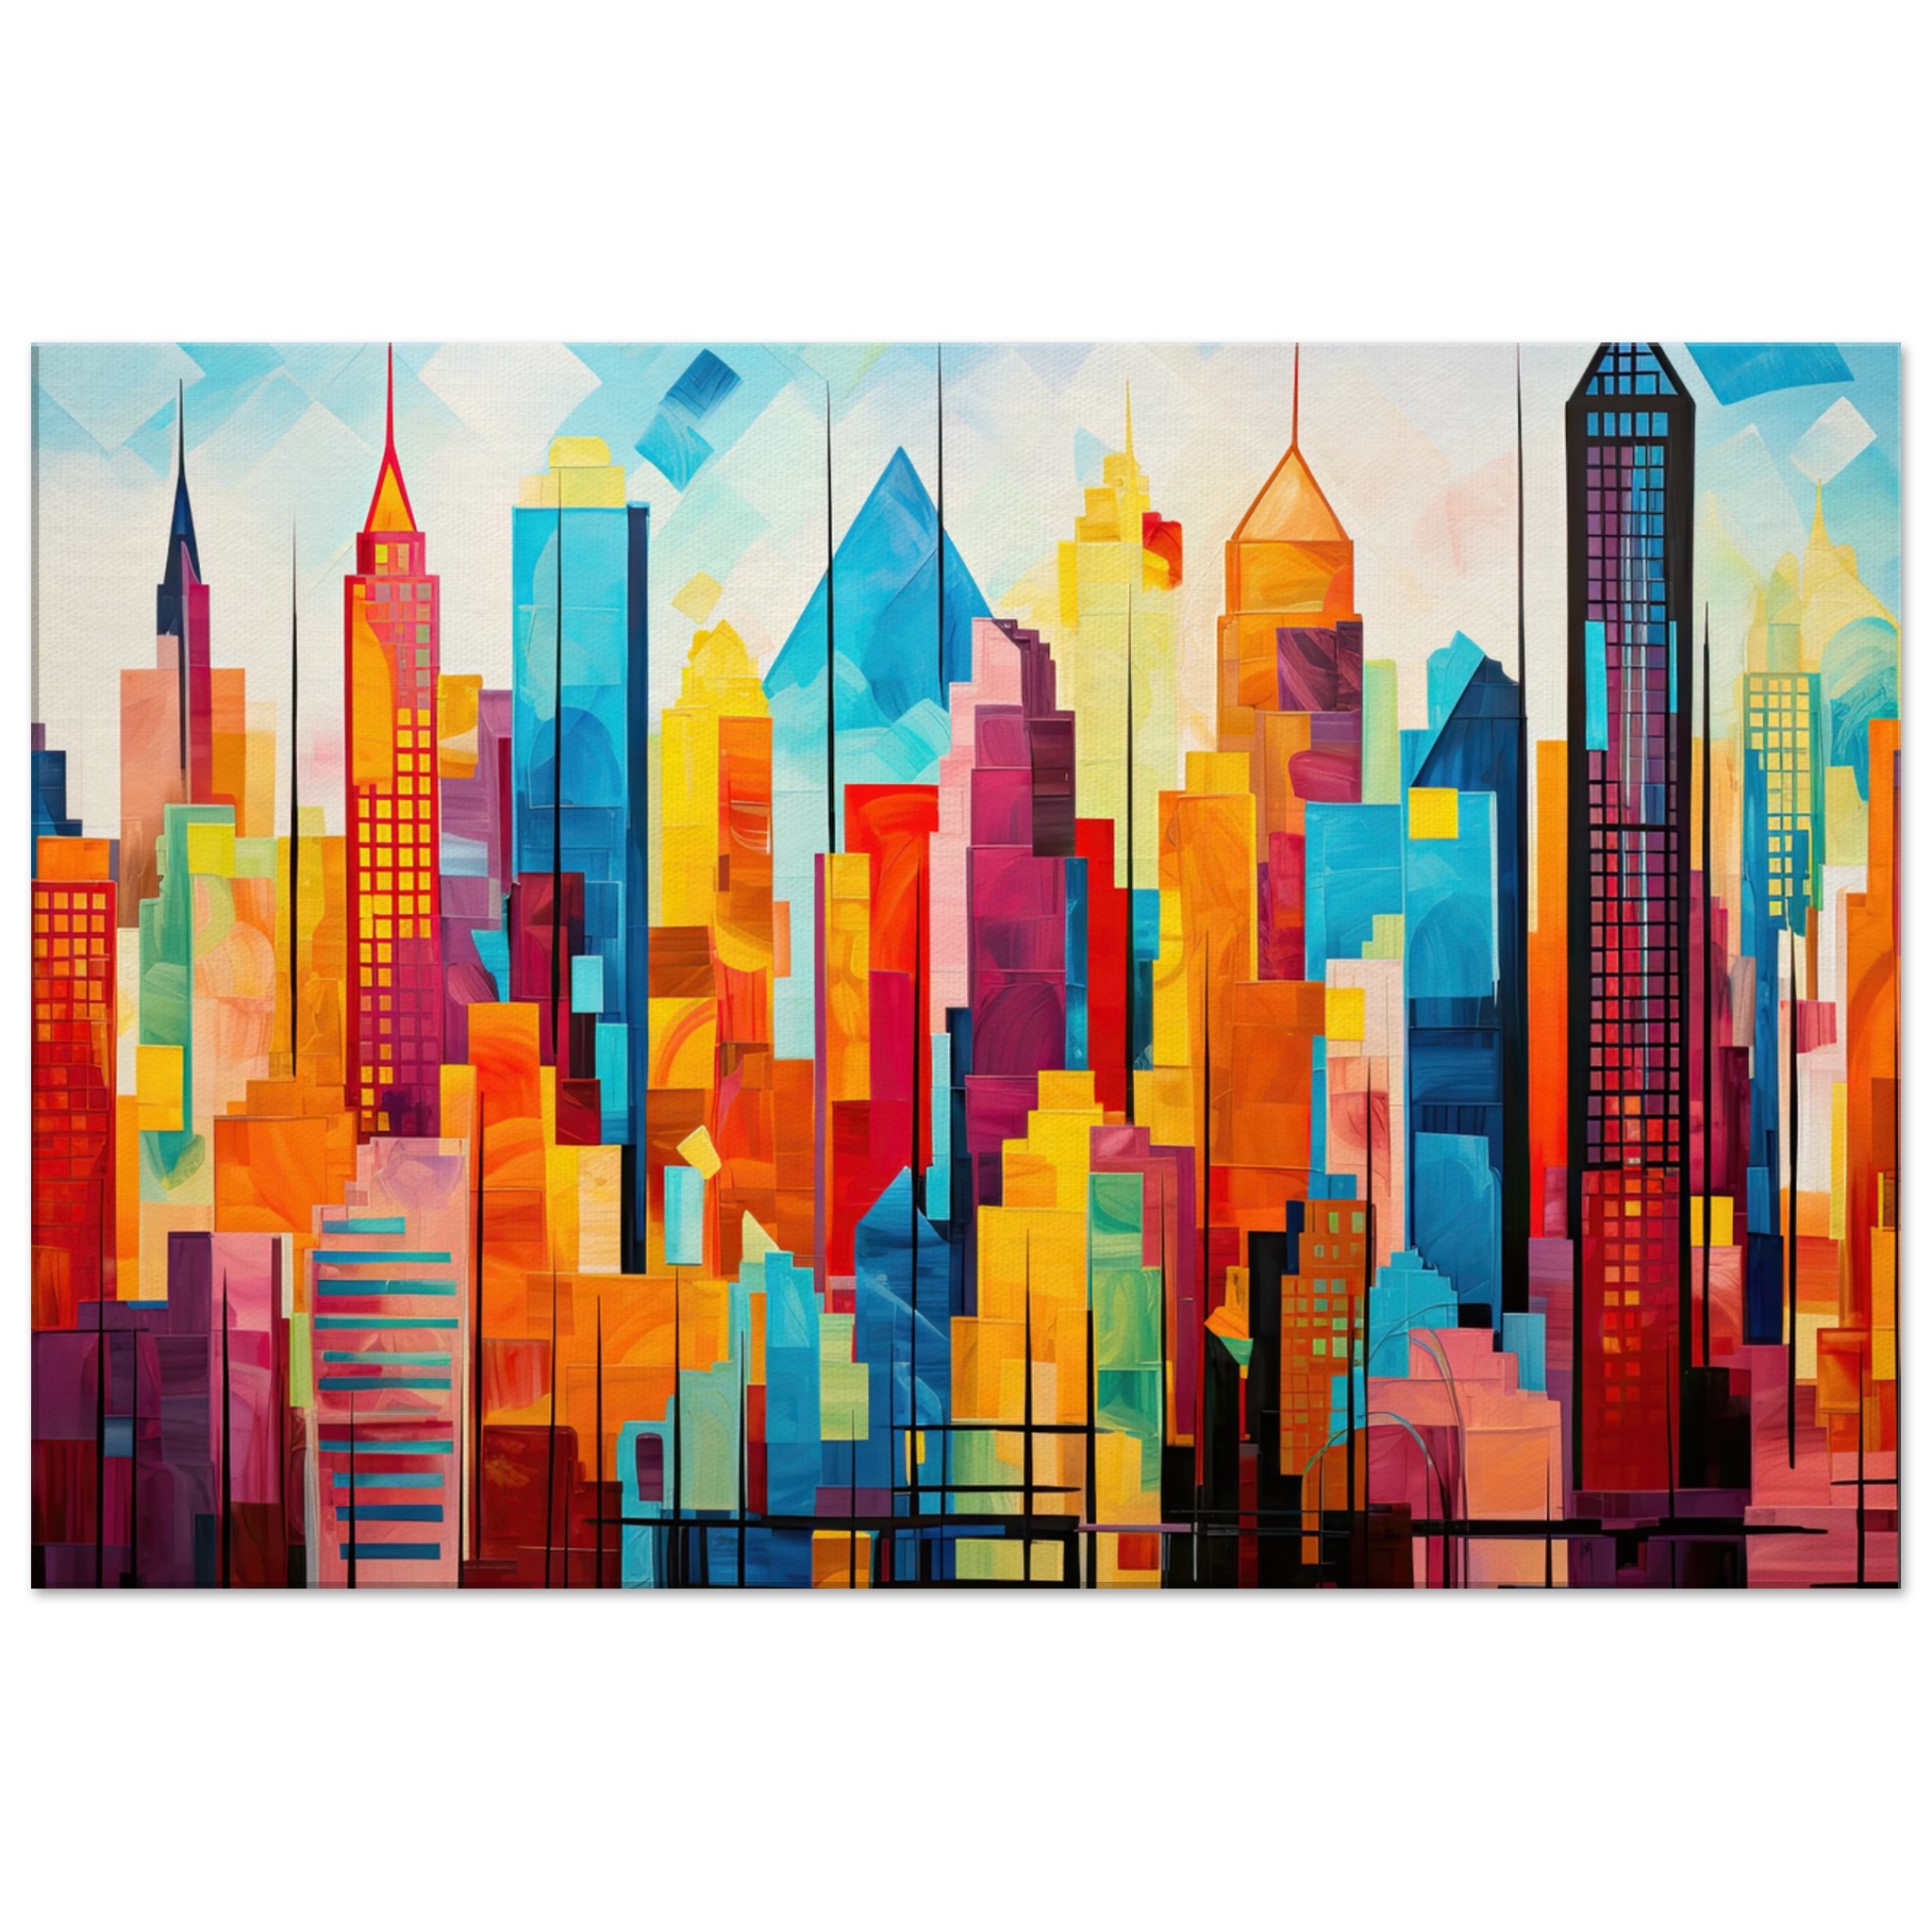 Colorful Abstract Cityscape Painted – Canvas Print